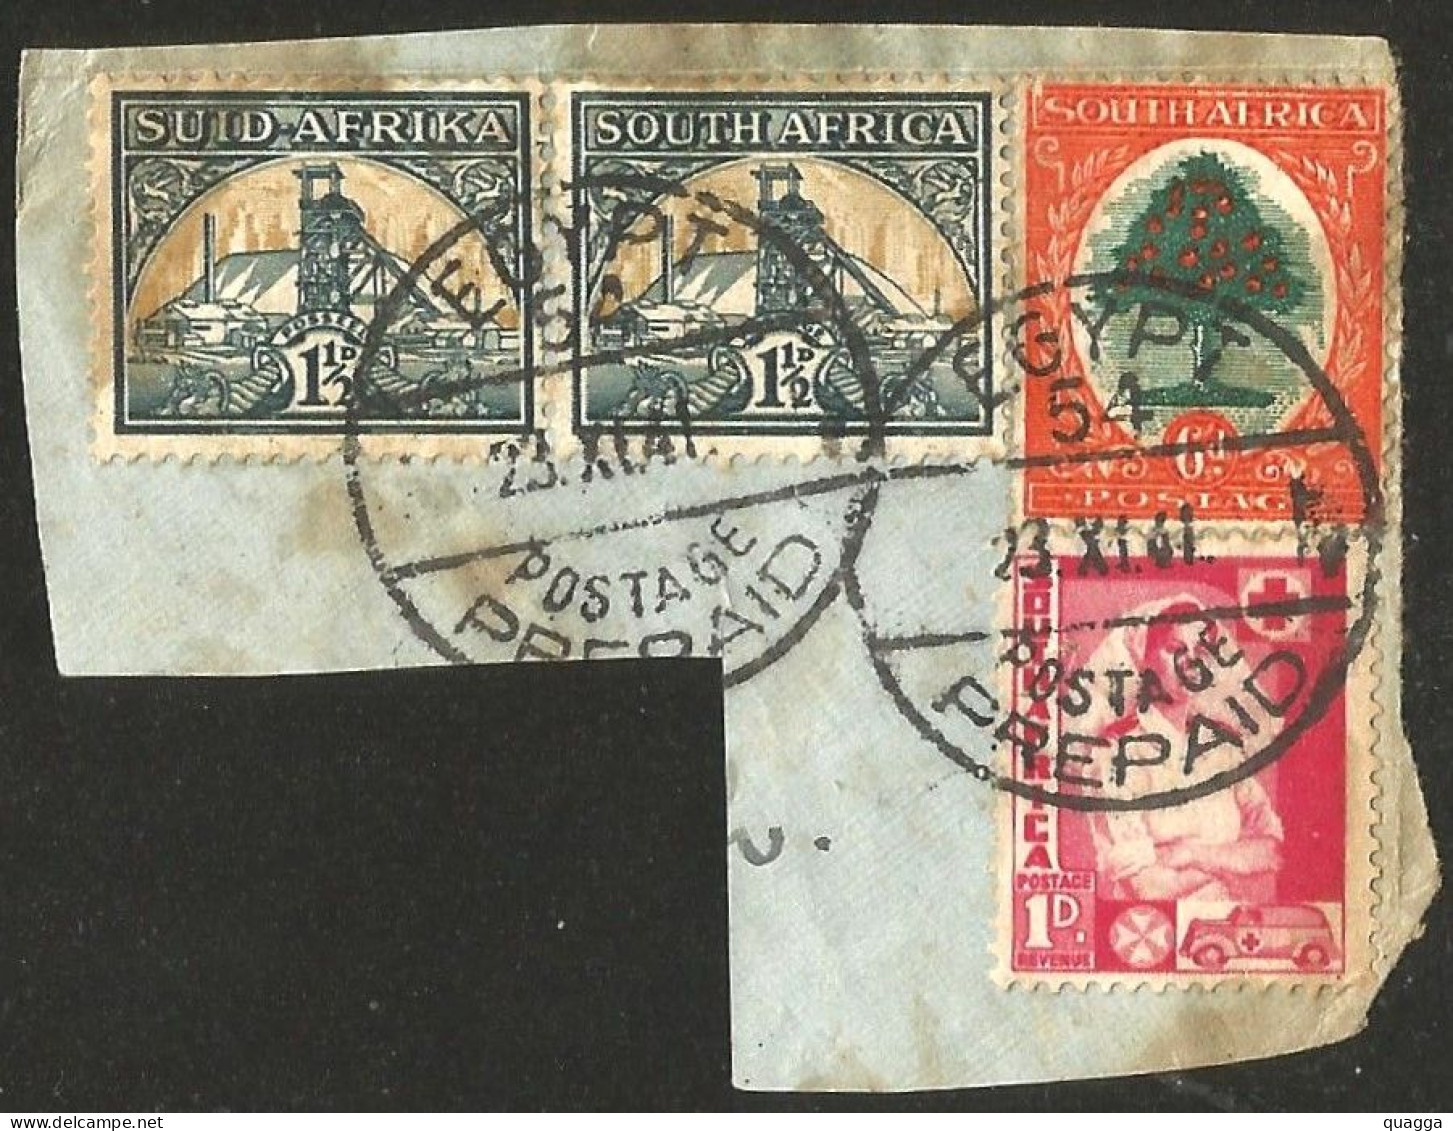 South Africa 1941-45. EGYPT 54 POSTAGE PREPAID Postmark. - Used Stamps